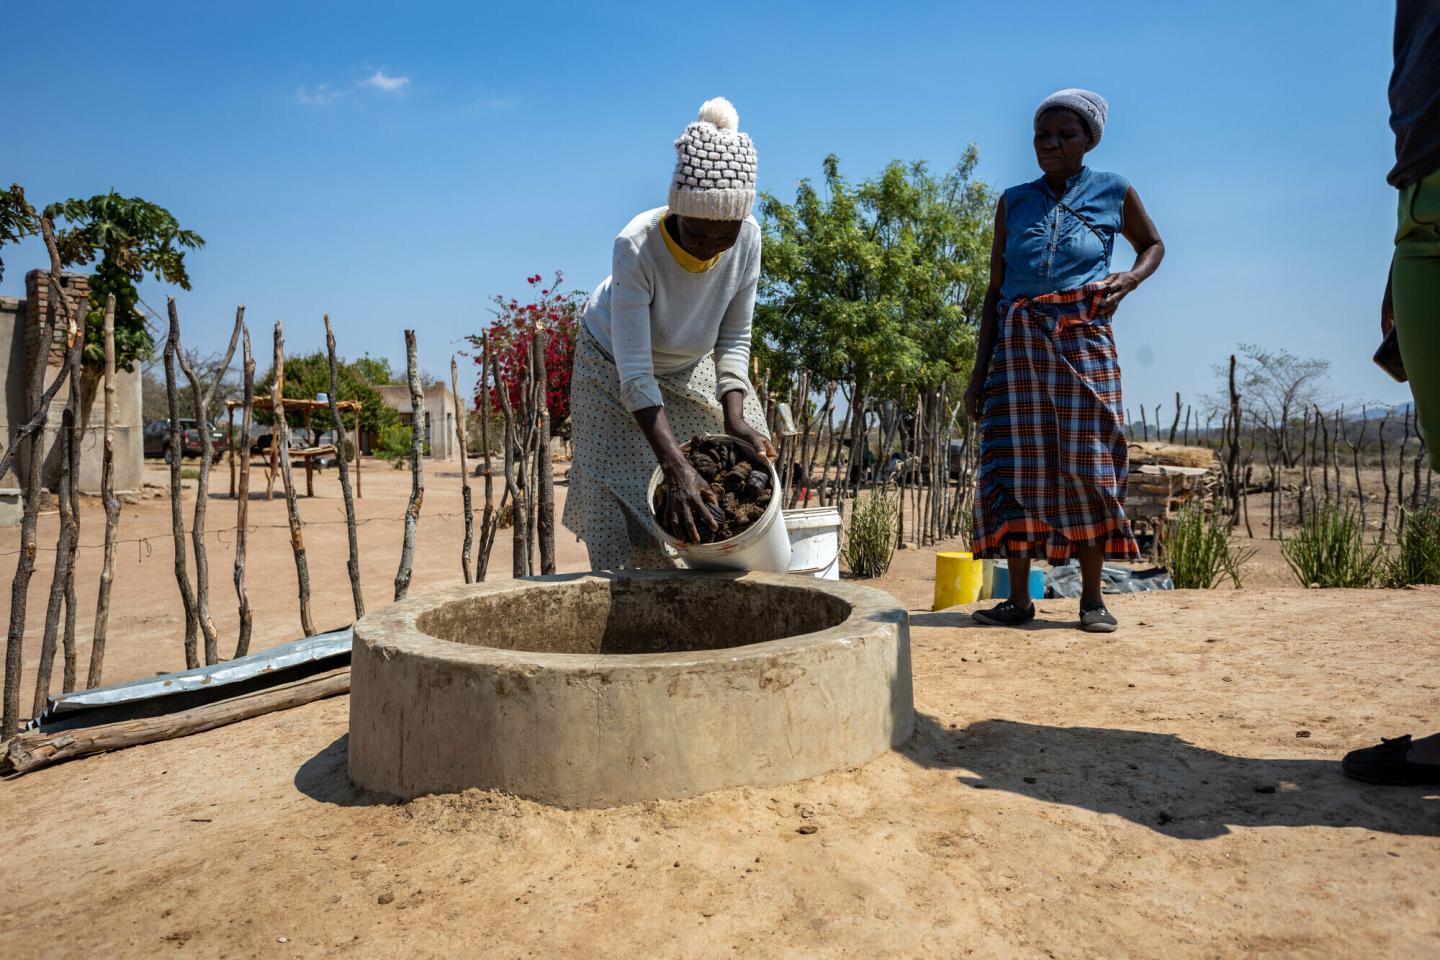 A Zimbabwean woman dumps a bucket of manure into a round cement biodigester